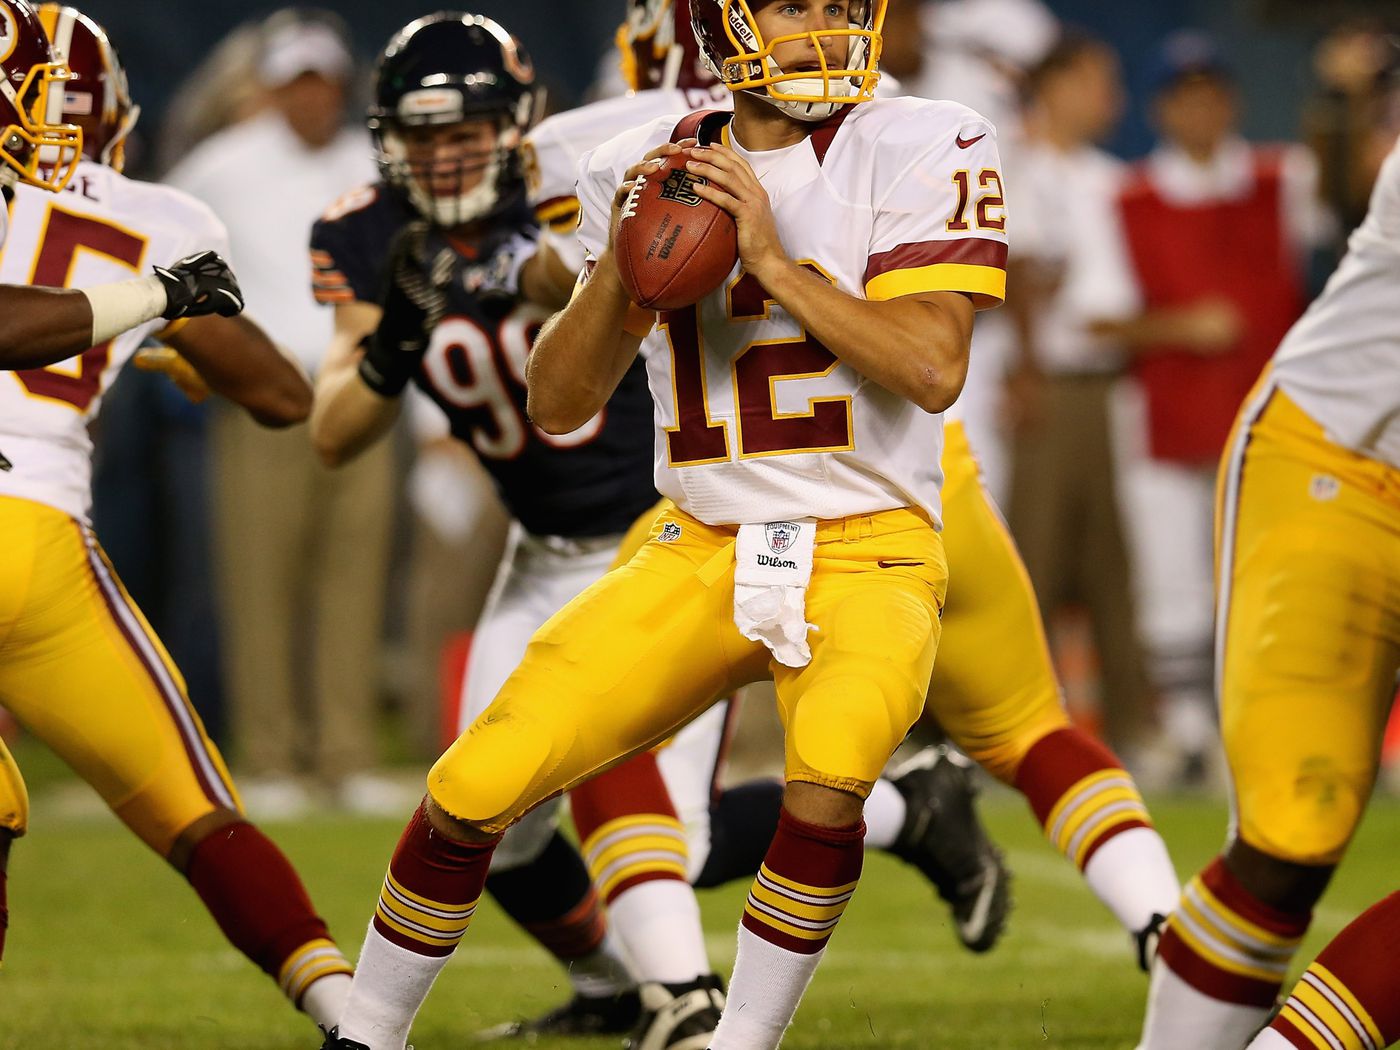 Redskins Vs. Bears: Four Takeaways From The Second Preseason Game